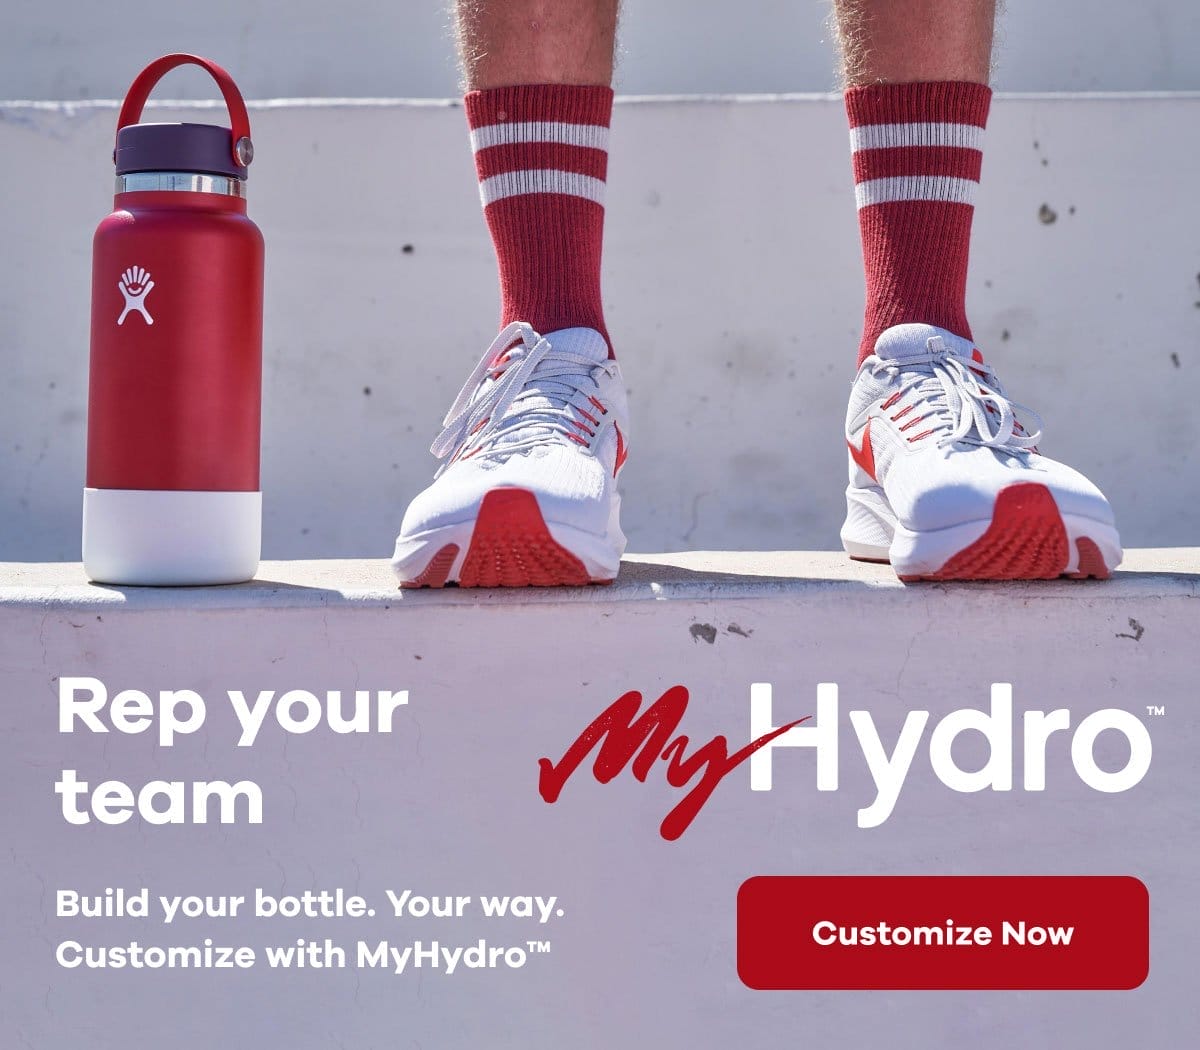 Red your team | MyHydro | Customize Now